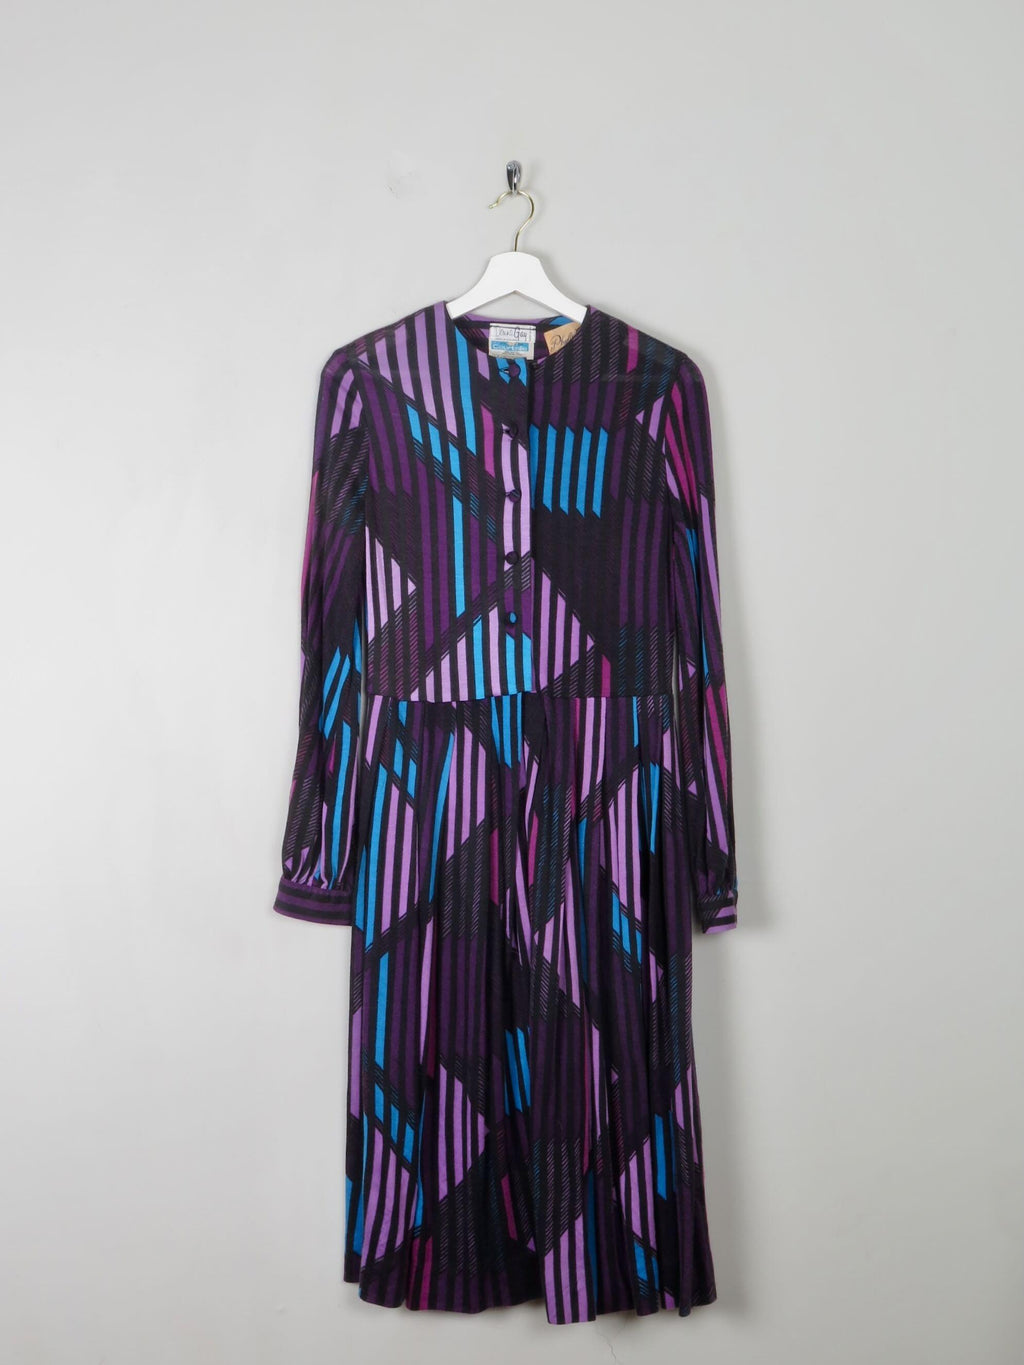 Vintage Colourful Printed Dress S - The Harlequin